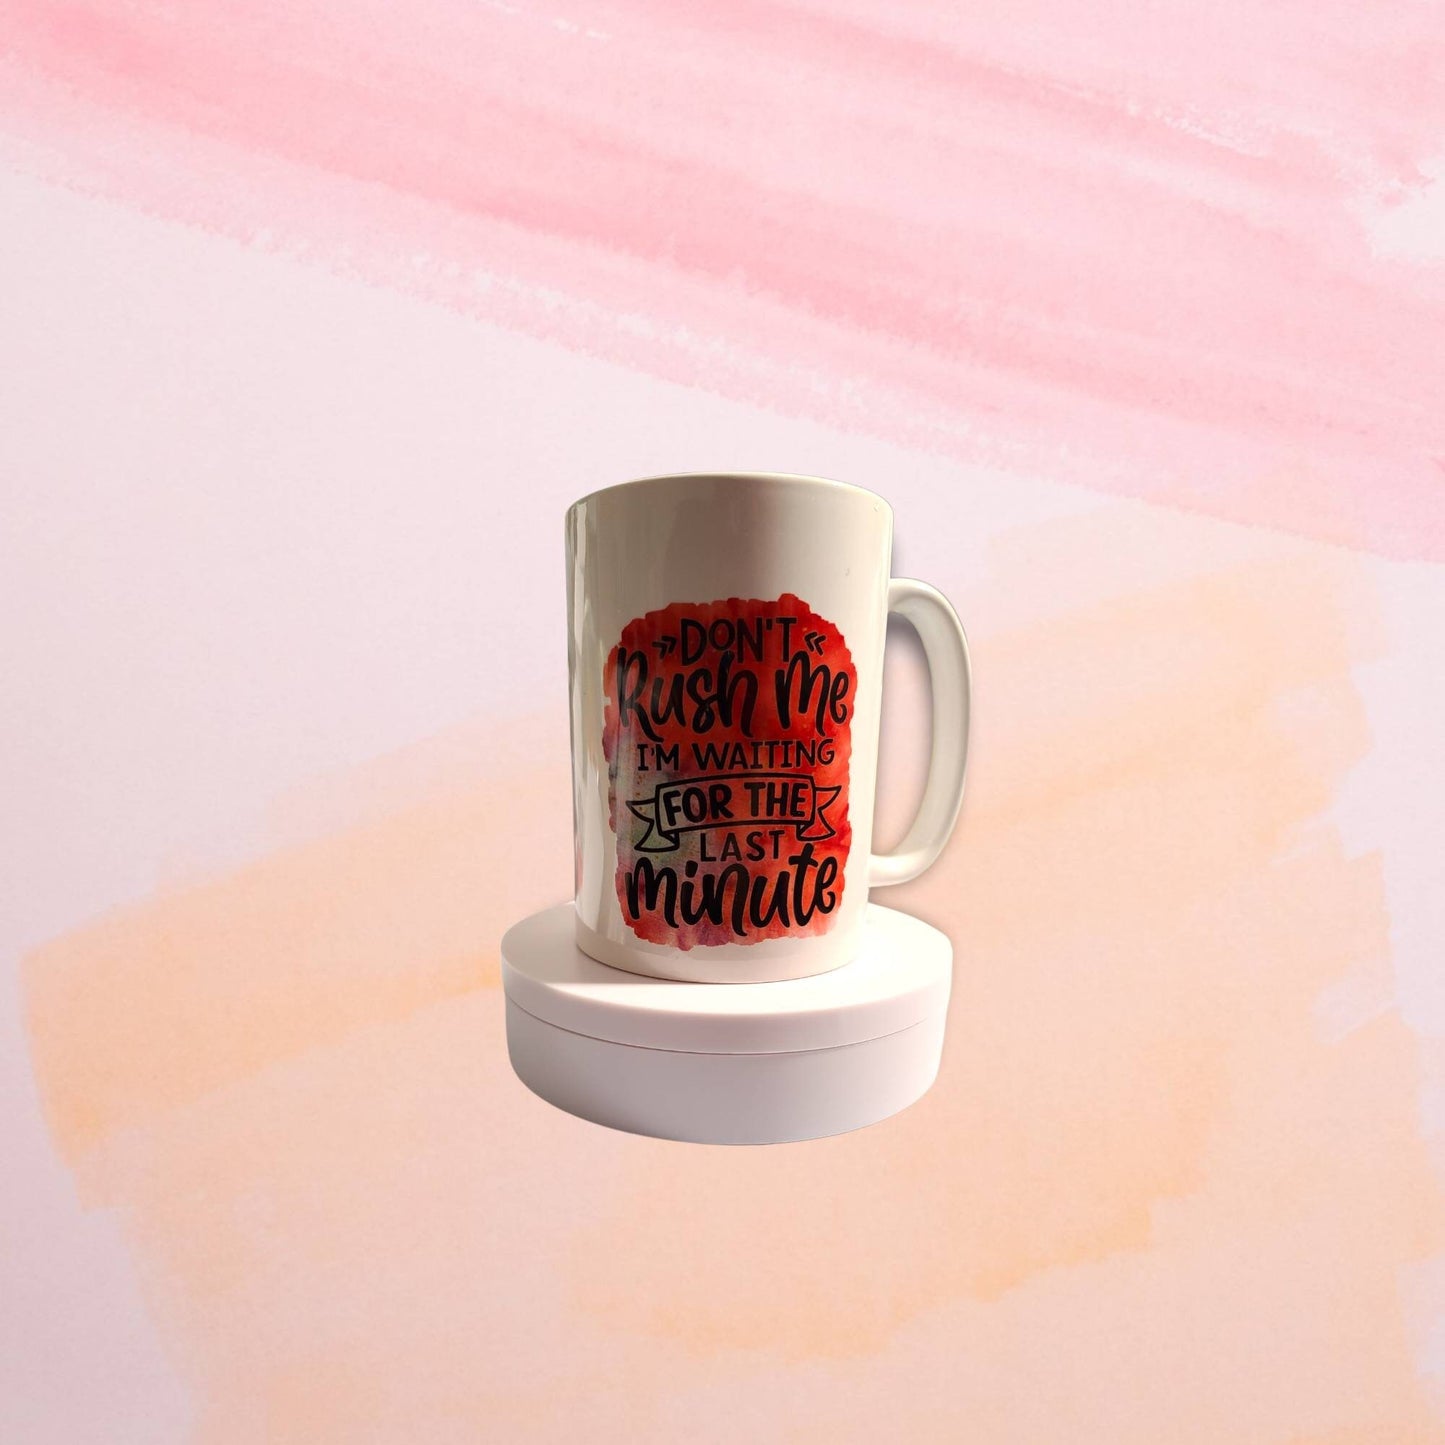 Mug with Sarcasm or funny saying.  Dont rush me coffee cup. Personalized coffee mug. Funny teacup for a gift.